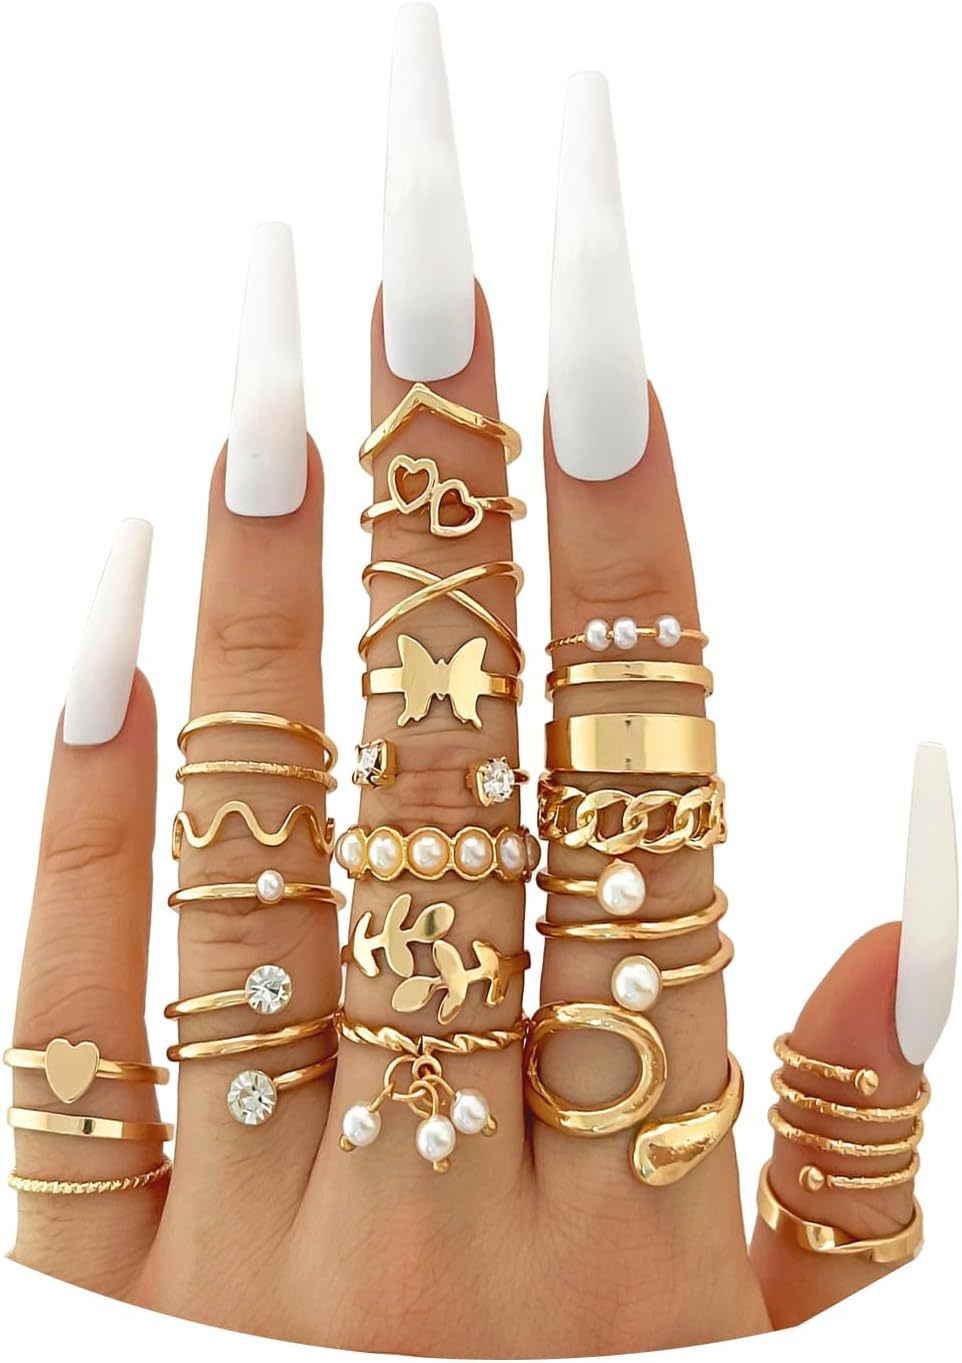 Fashion Stackable Rings Set - $25.19